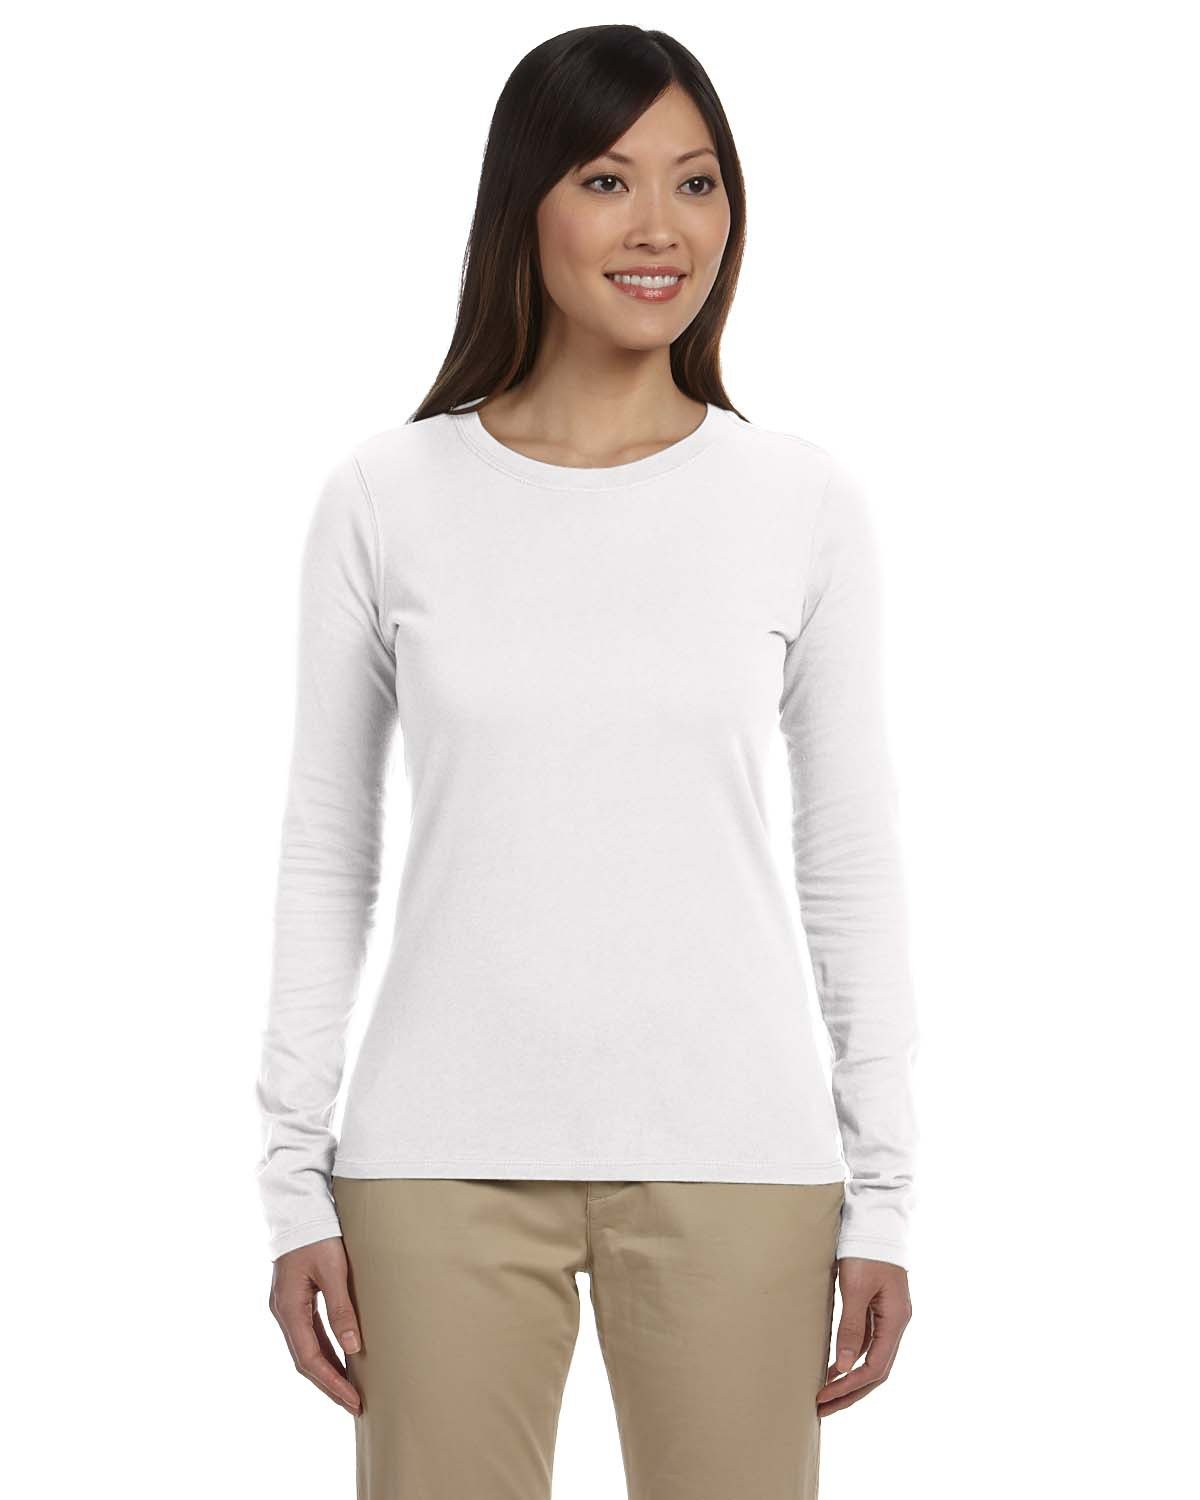 econscious Ladies' Classic Long-Sleeve T-Shirt | alphabroder